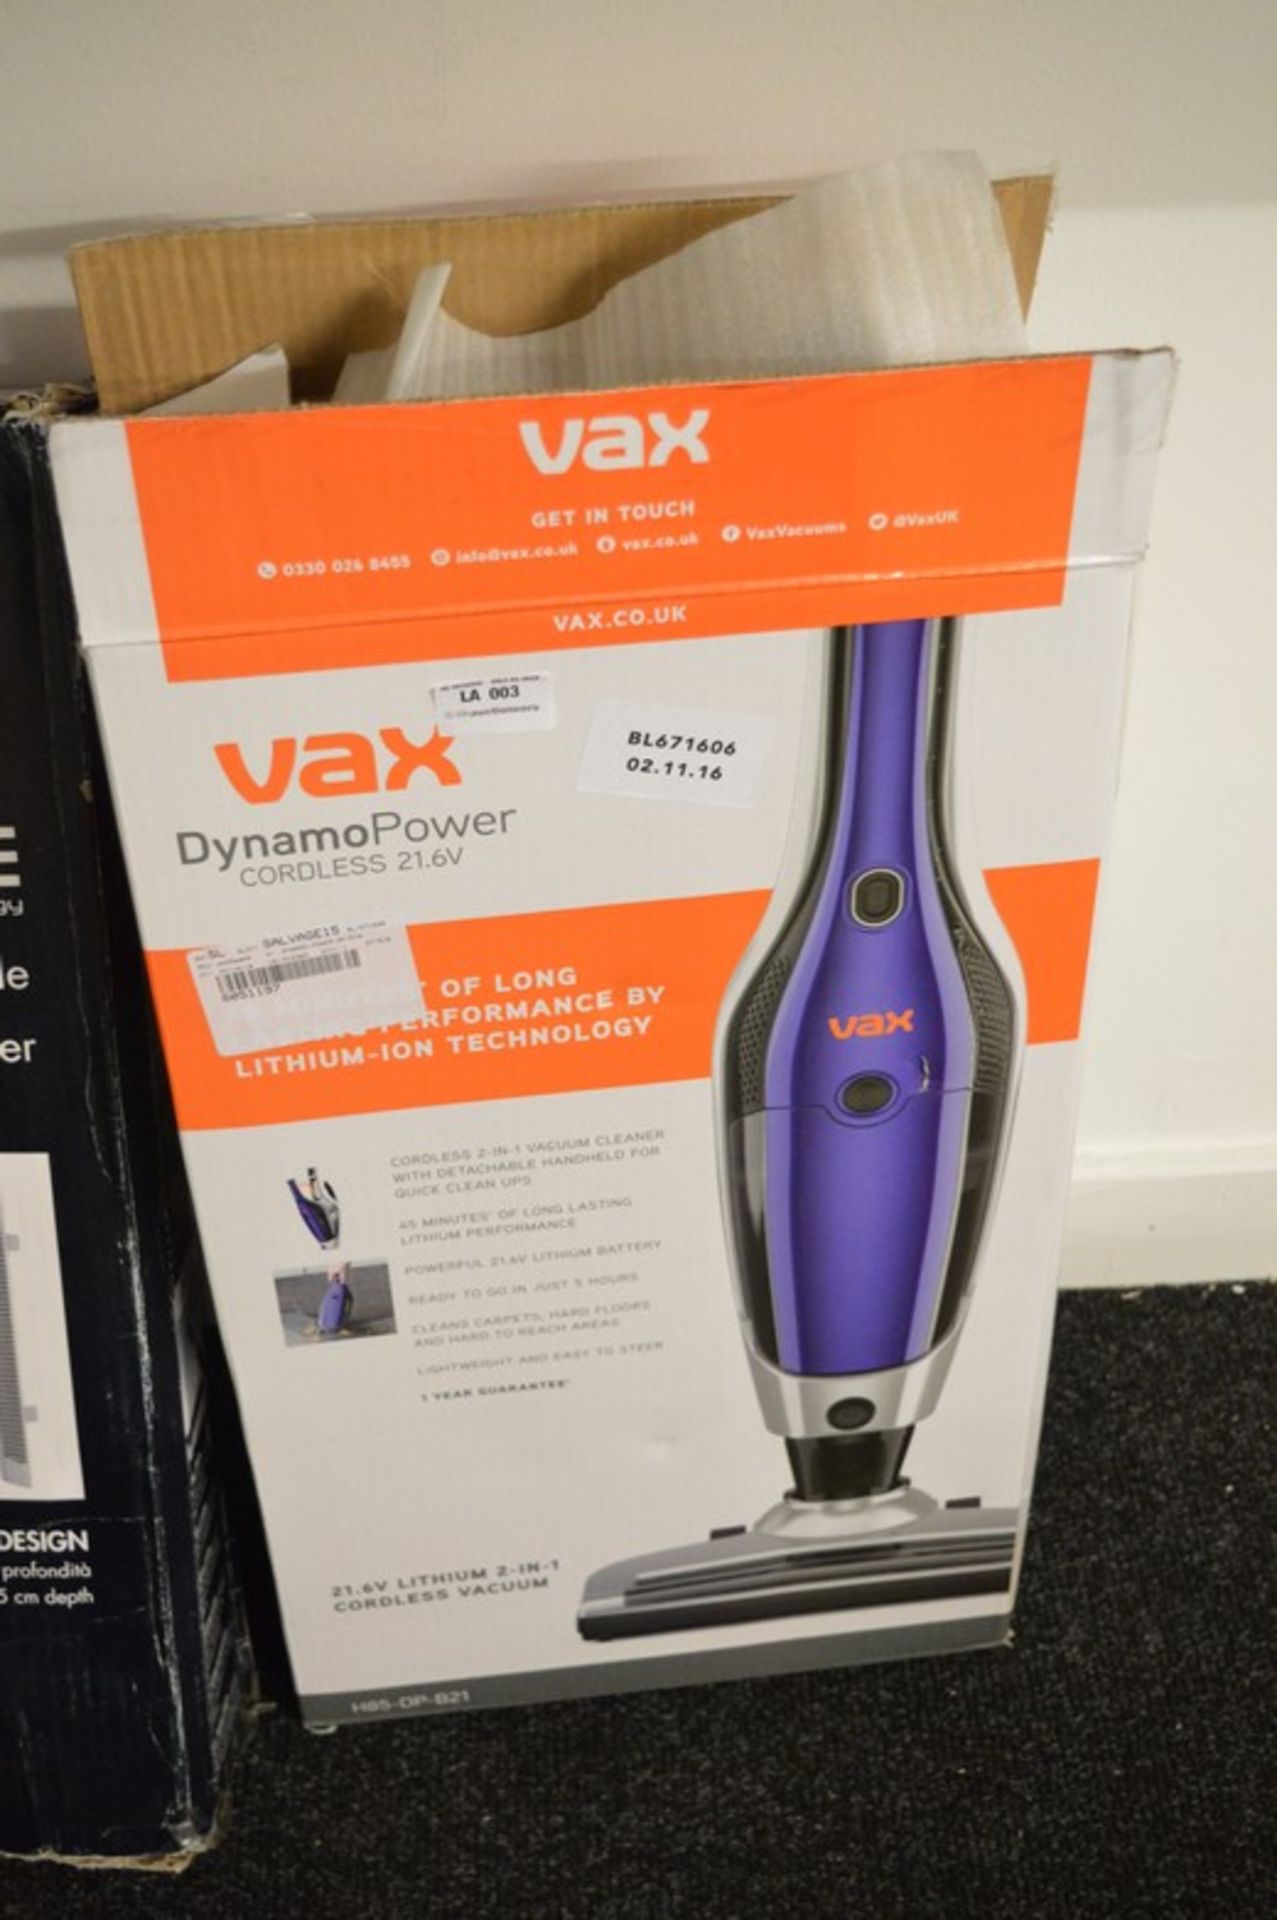 1 x BOXED VAX DYNAMO POWER CORDLESS VACUUM CLEANER RRP £150 02.11.16 *PLEASE NOTE THAT THE BID PRICE